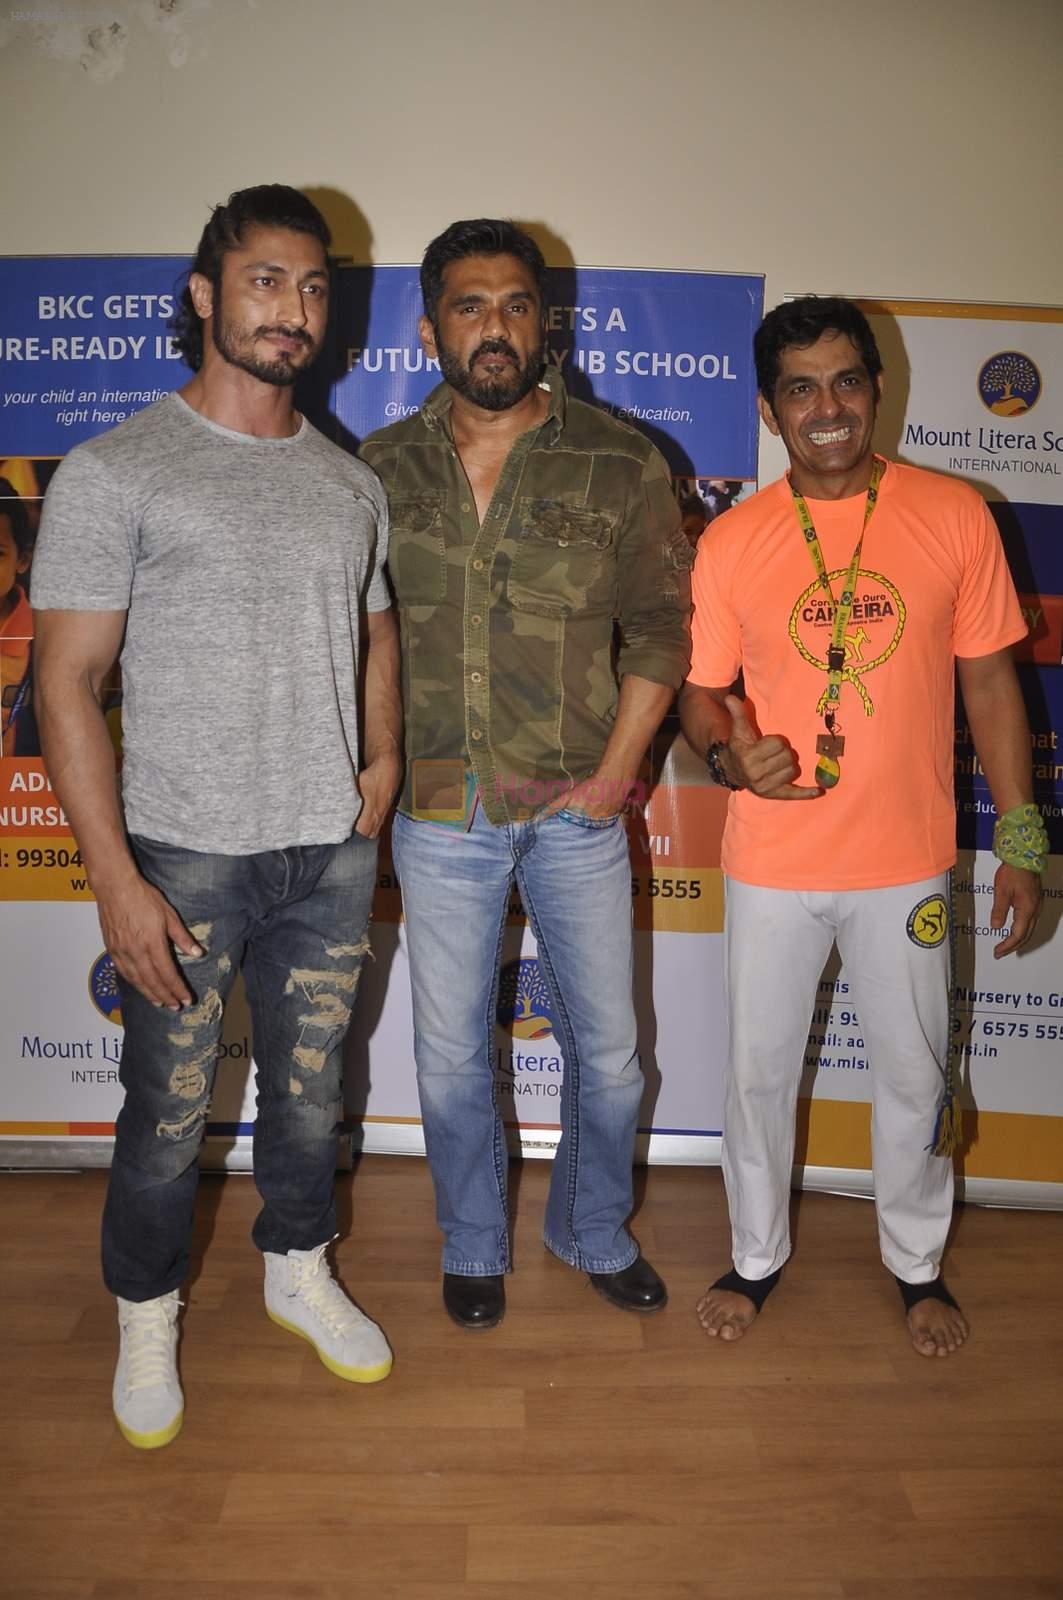 Vidyut Jamwal and Sunil Shetty attend a school event on 12th June 2015